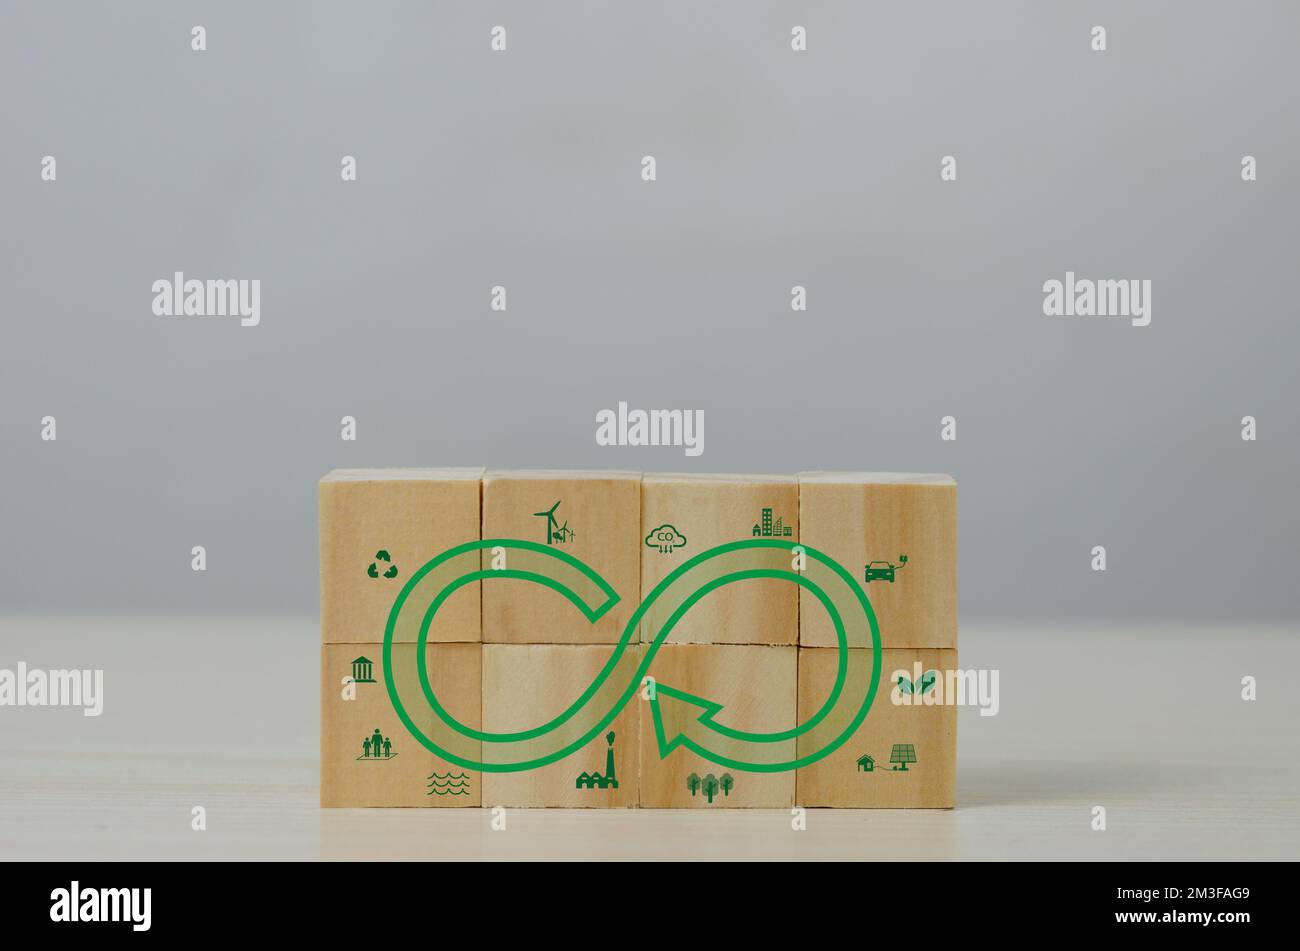 Net zero green eco infinity technology innovation eco carbon renewable energy sustainable development business Circular Economy concept with wood cube Stock Photo